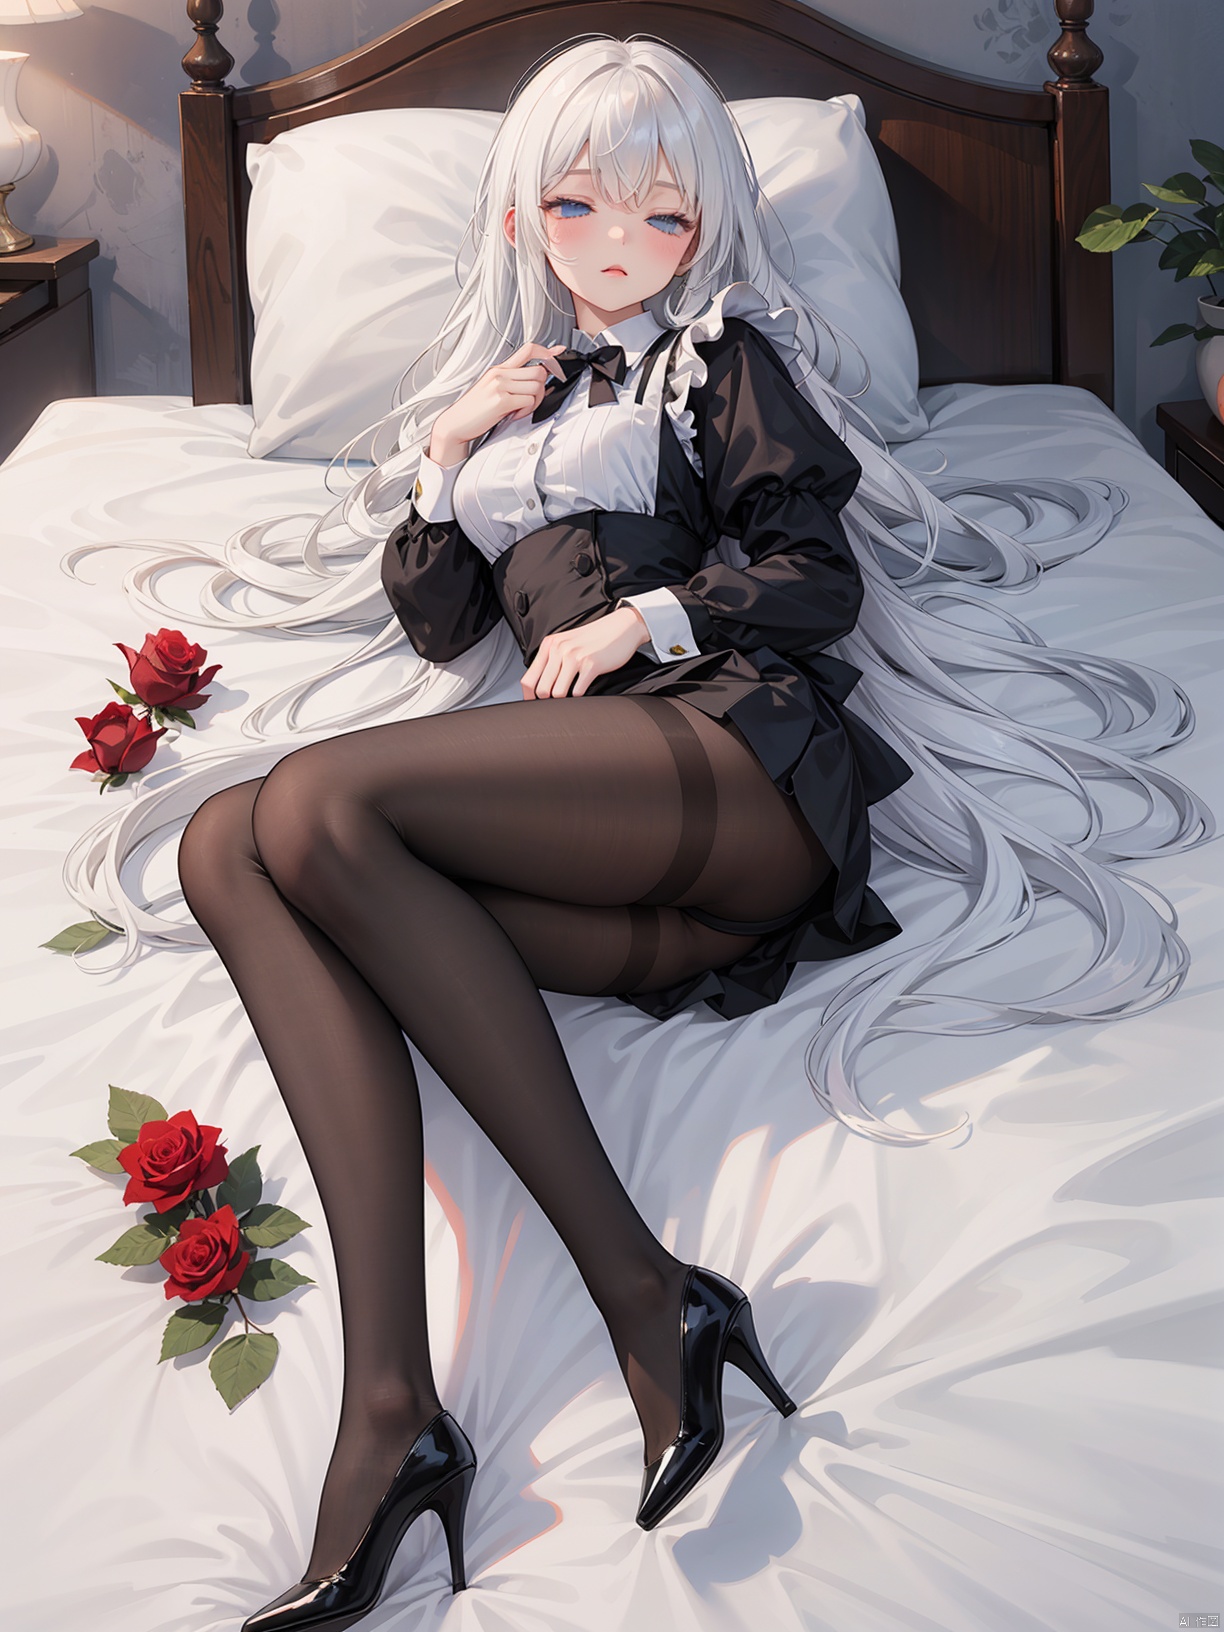 Wearing maid attire, with fluffy and dense long hair, big wavy curls, white haired beauty, white long hair, slender legs, sleeping, sleeping peacefully, mature charm, fingers holding the bed sheet, blue eyes, high heels, tall figure, full and round thighs, surrounded by roses, lying in a strange space, red roses, black pantyhose, heavy on the bed